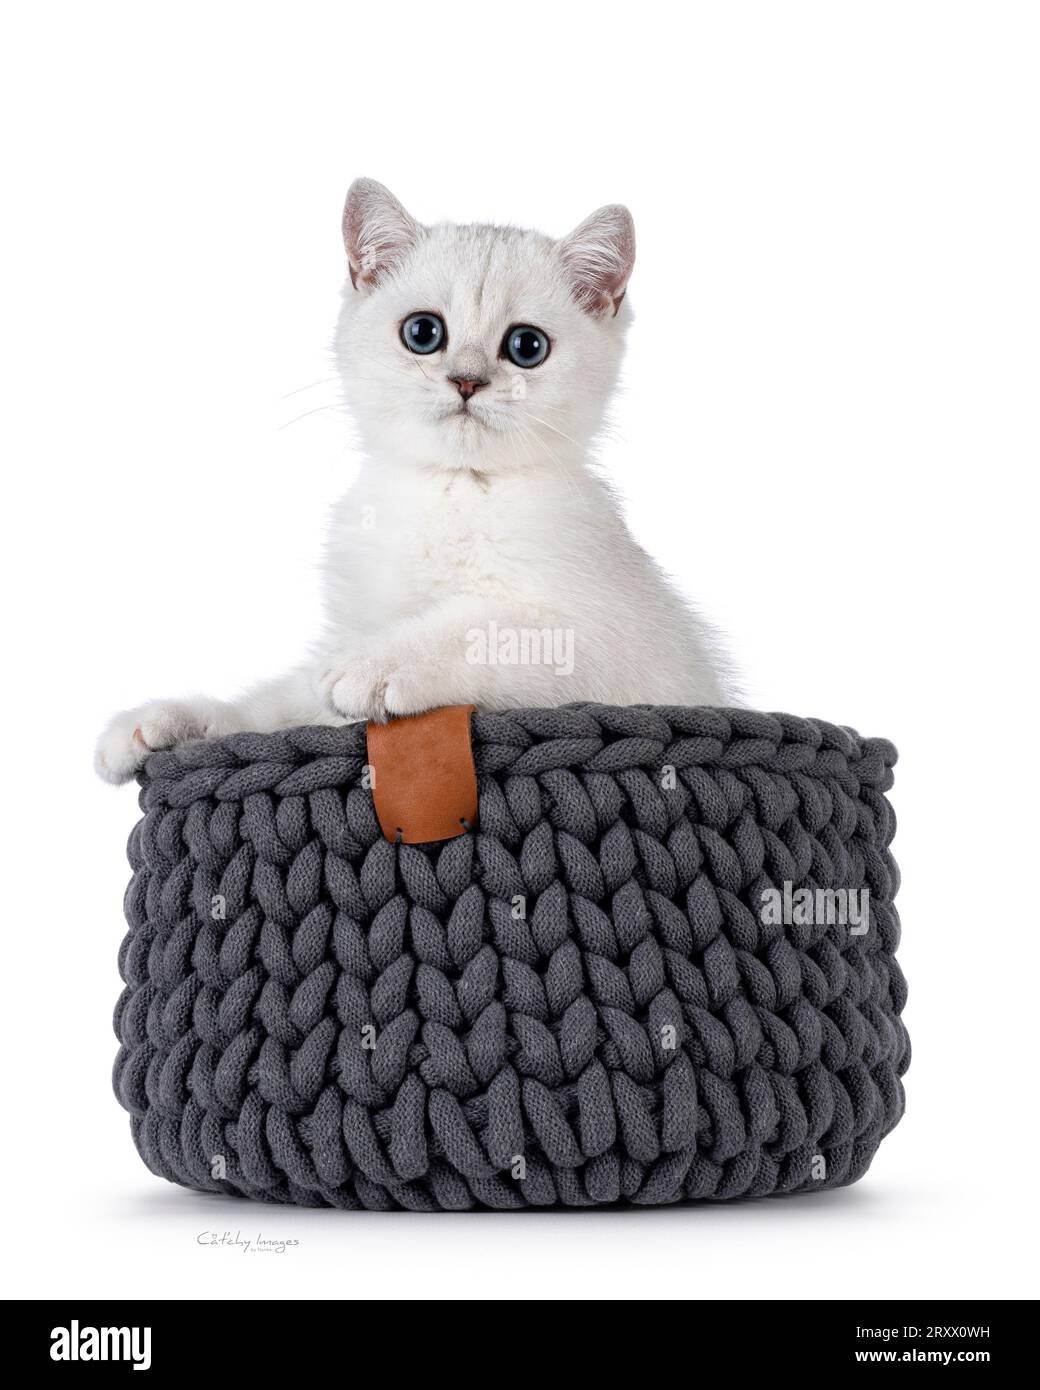 Adorable silver shaded British Shorthair cat kitten, sitting in knitted basket. Looking towards camera. Isolated on a white background. Stock Photo